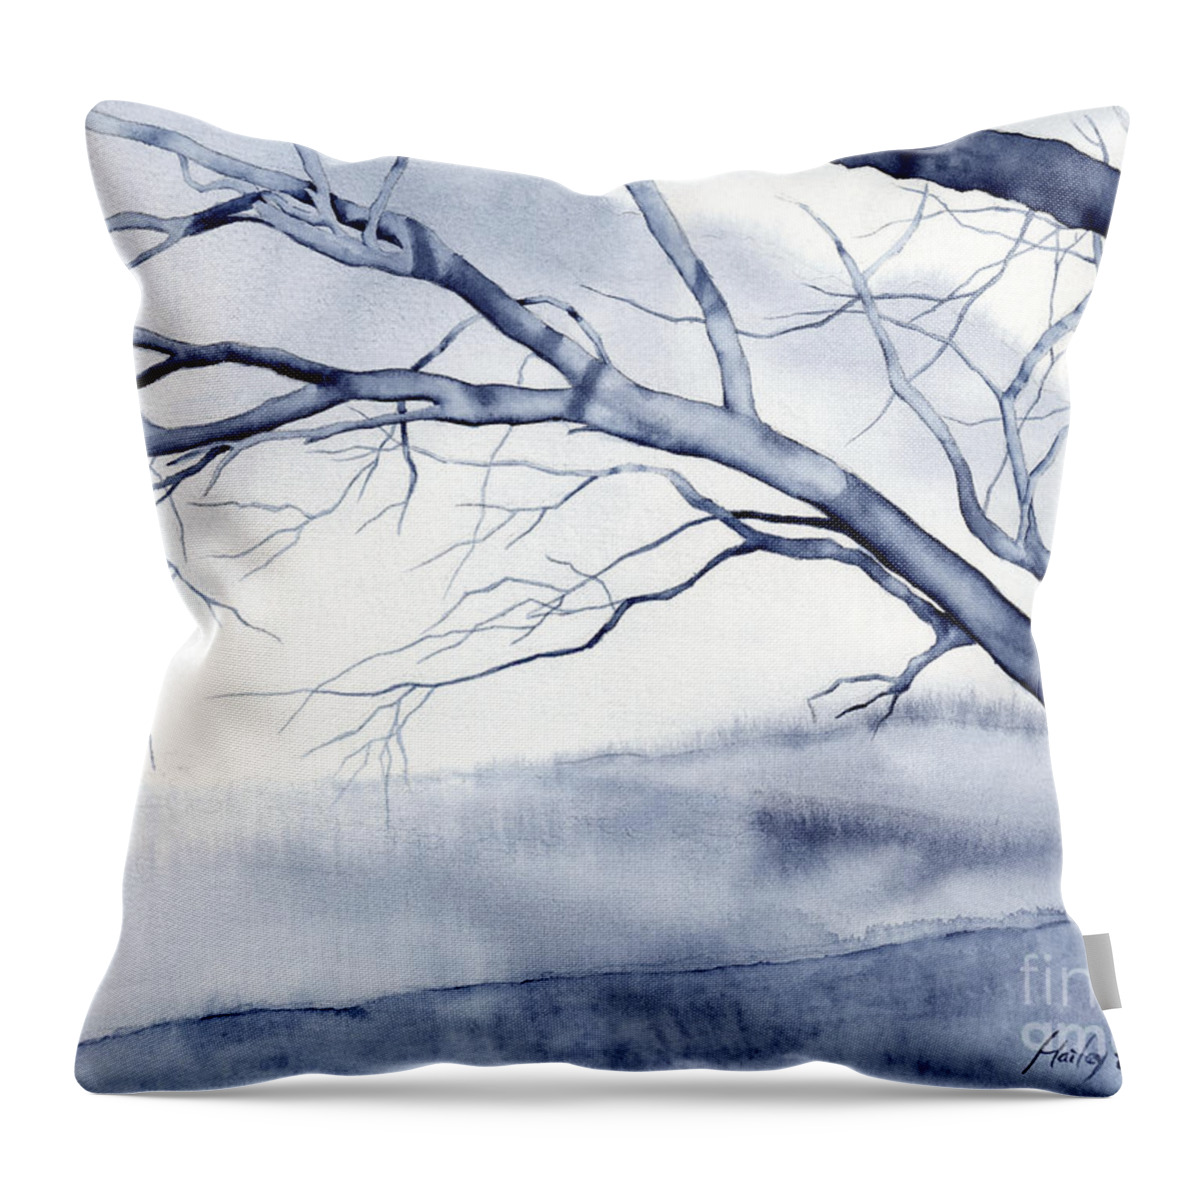 Watercolor Throw Pillow featuring the painting Bare Trees by Hailey E Herrera